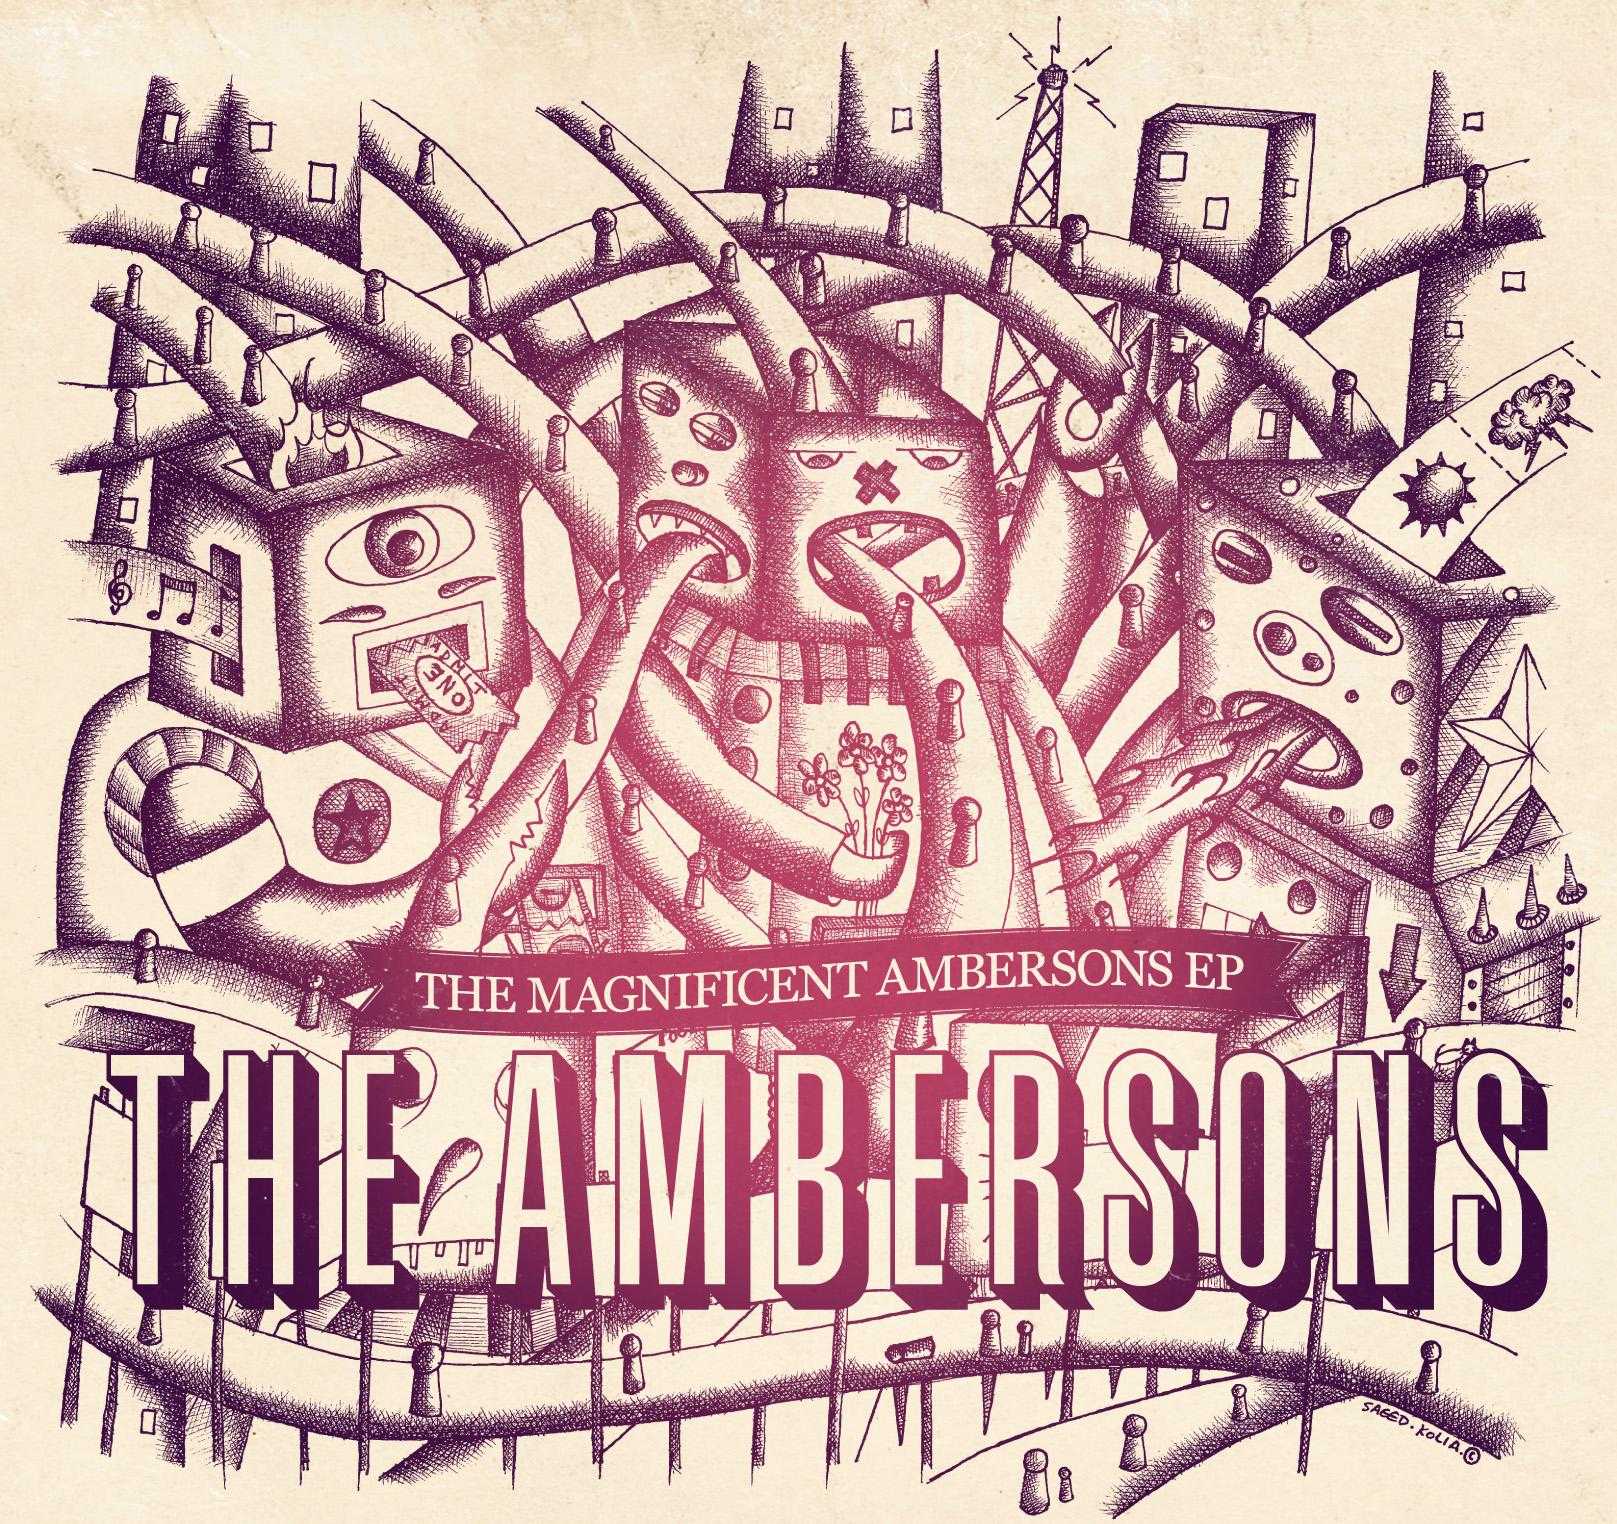 The Ambersons debut EP ‘The Magnificent Ambersons – available now